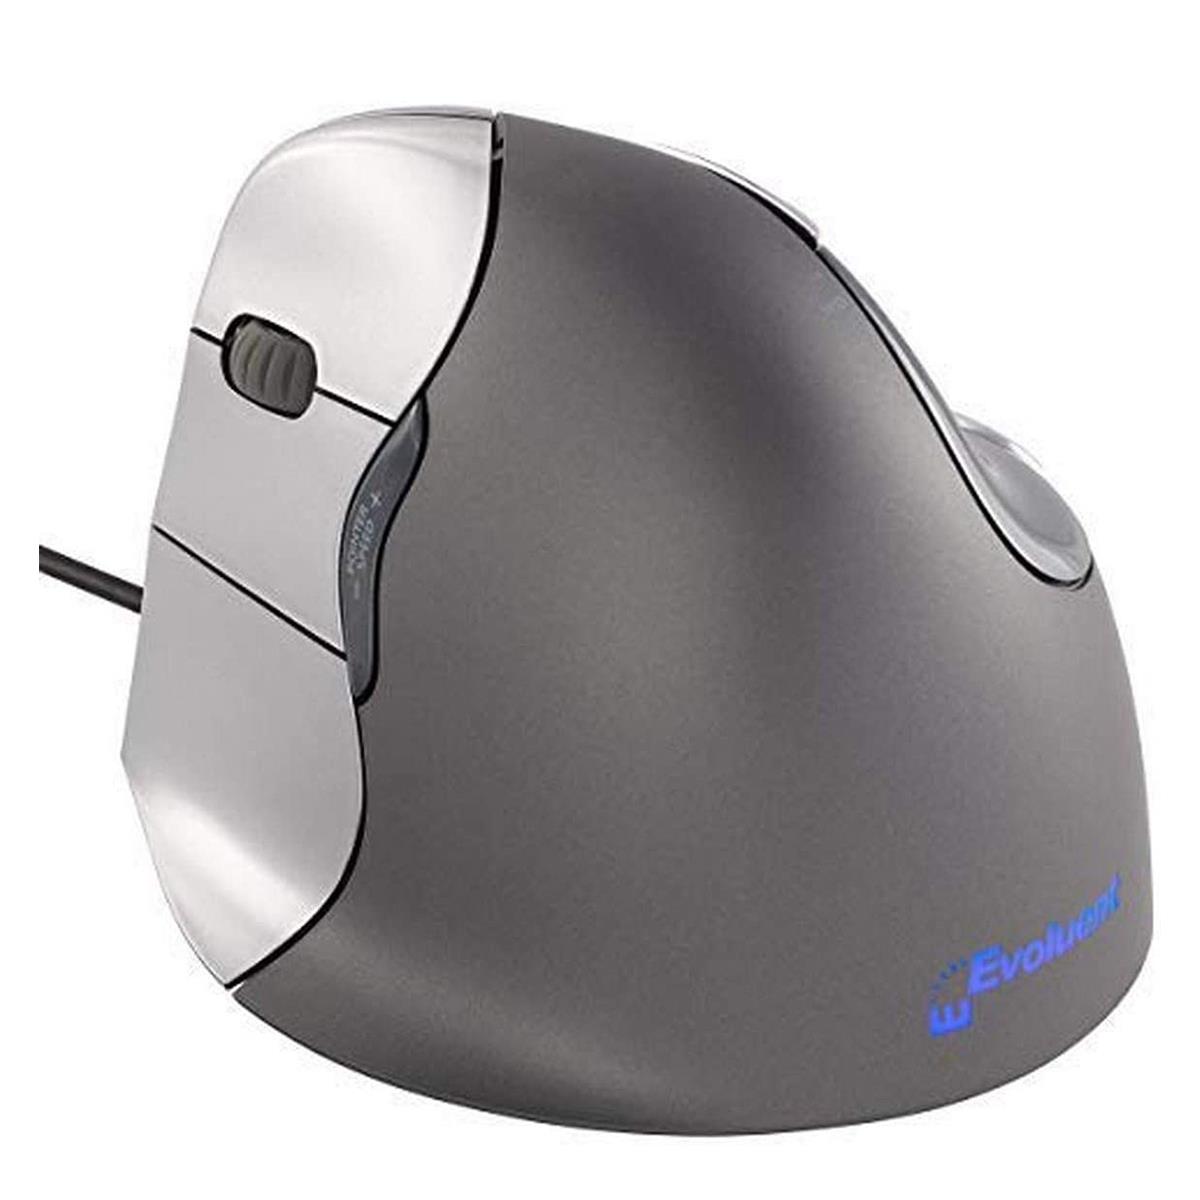 Image of Evoluent VerticalMouse 4 Left-Handed Ergonomic Wired Mouse